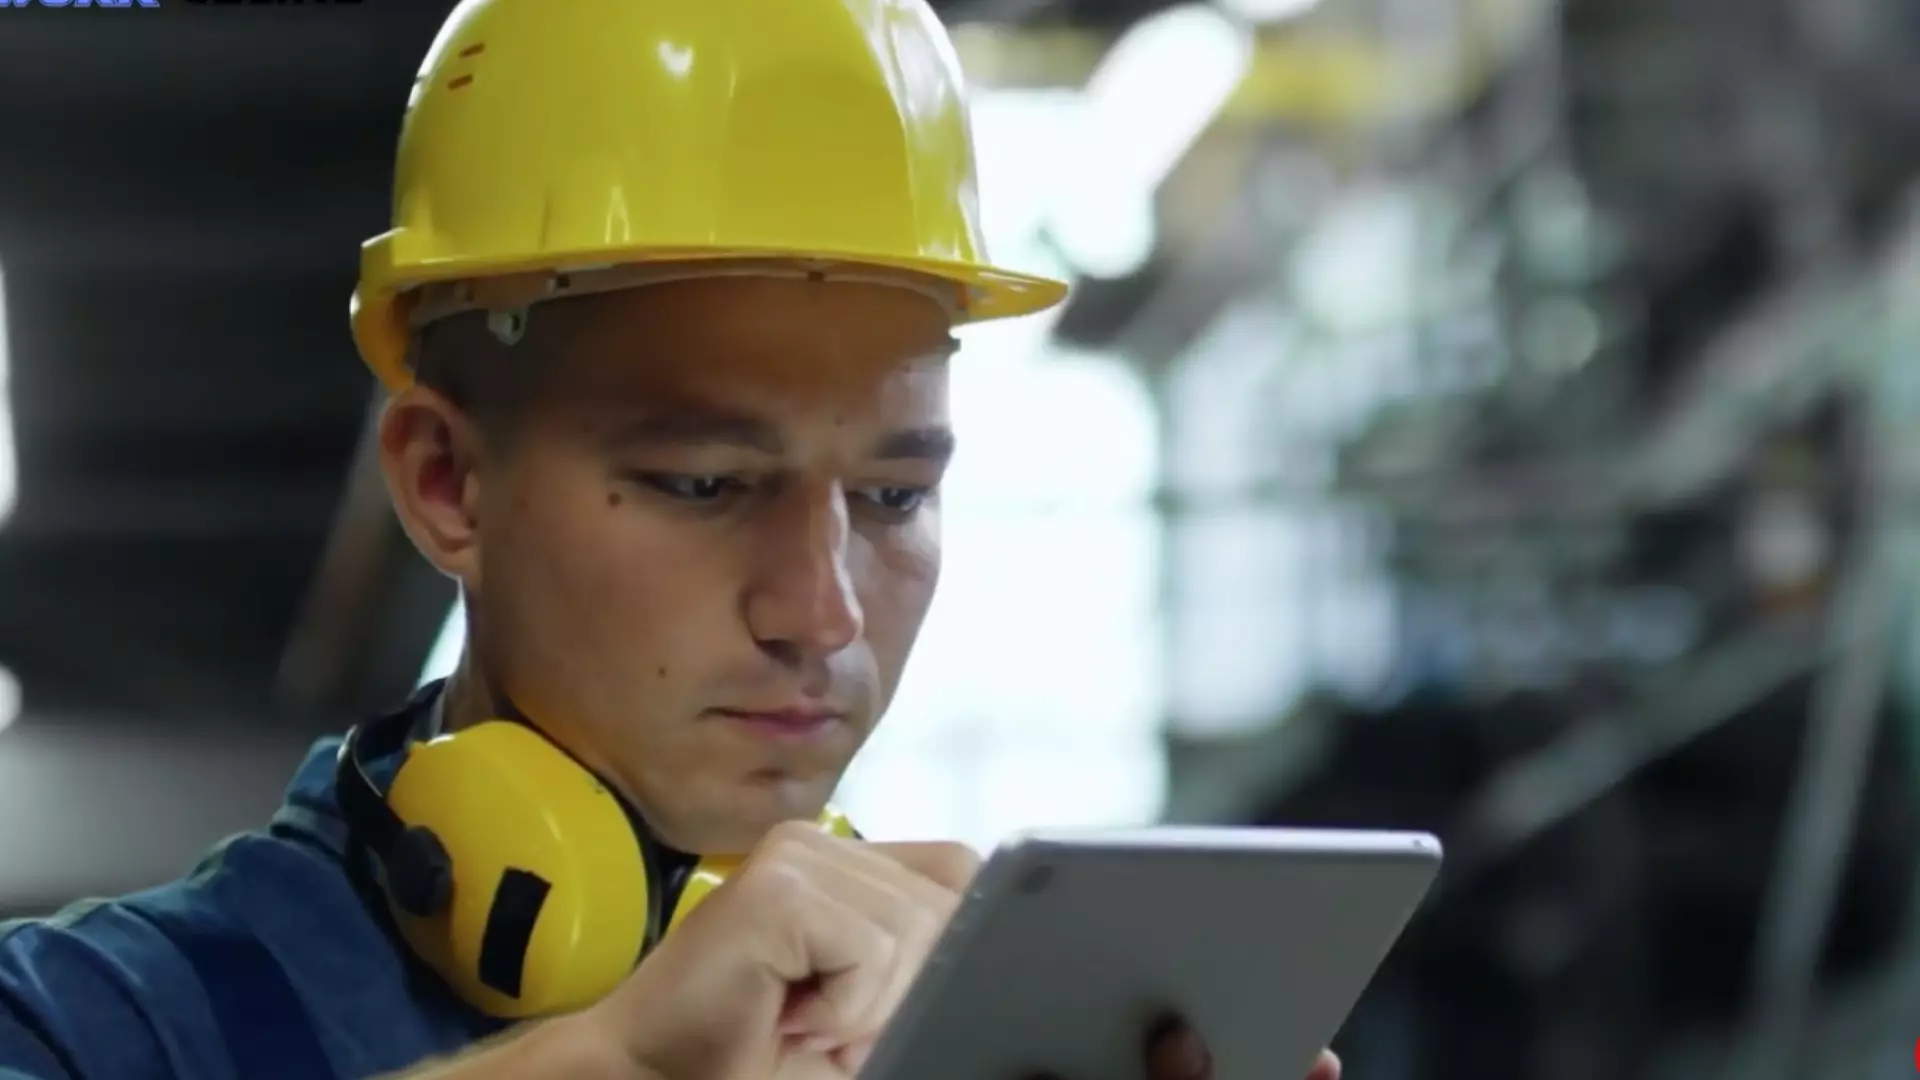 How To Find Noise-Canceling Headphones For Construction Workers